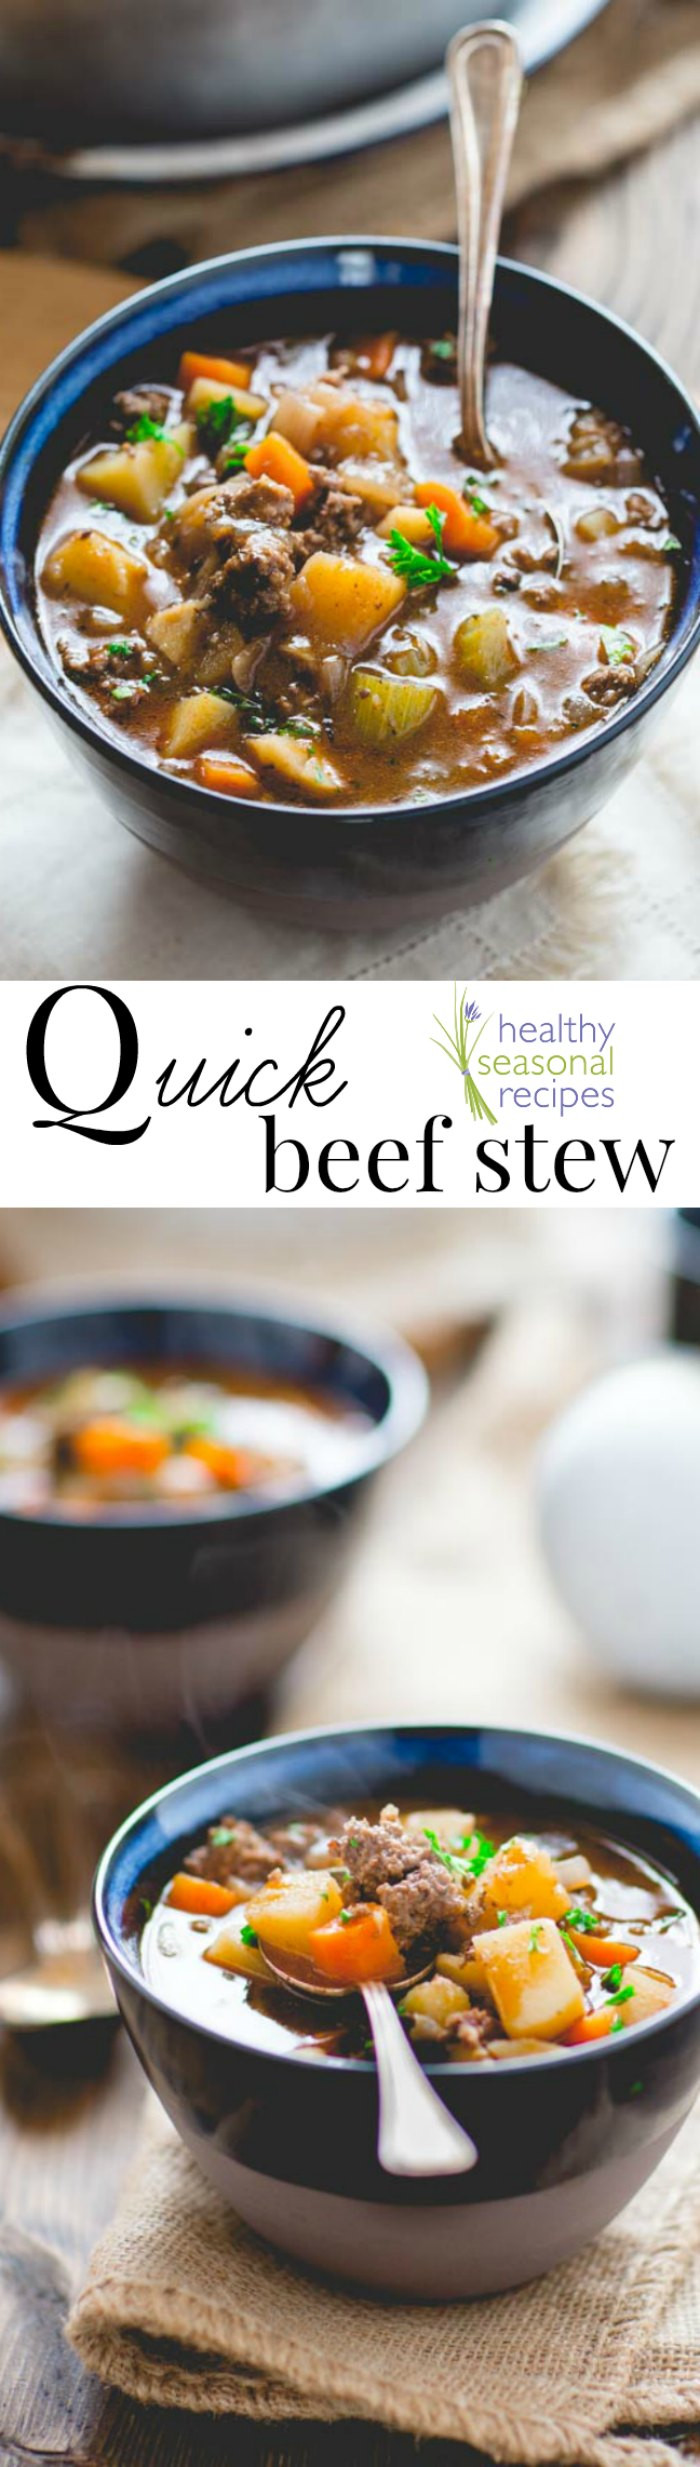 Slow Cooker Heart Healthy Recipes
 heart healthy beef stew slow cooker